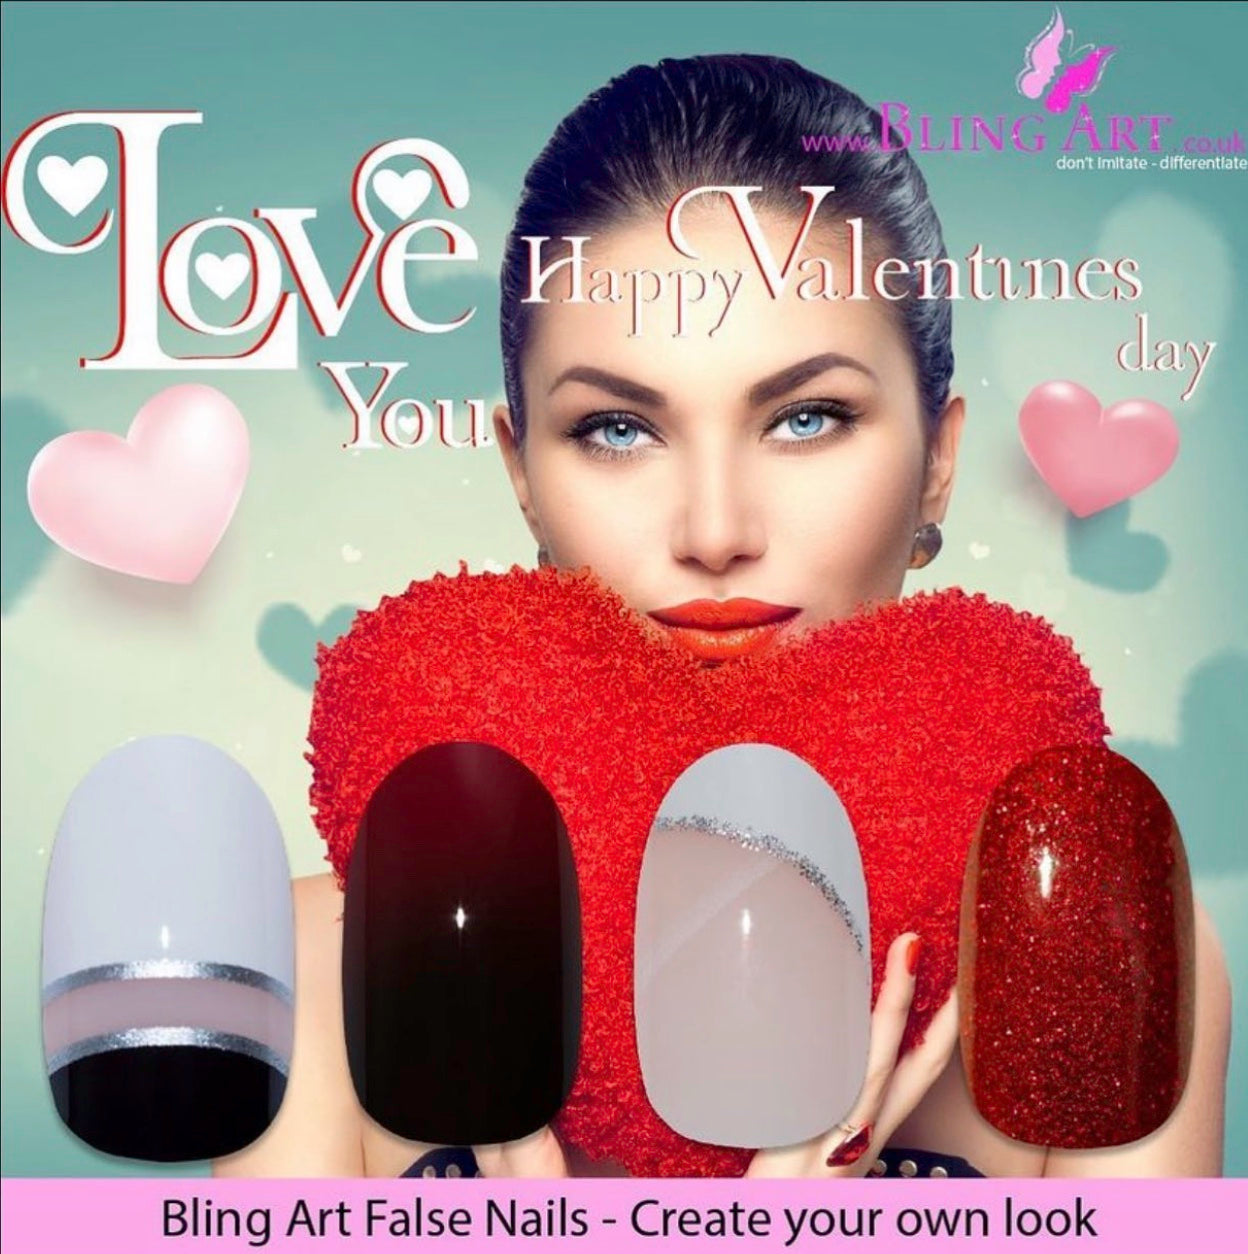 Get Fake Nails For Valentine’s Day